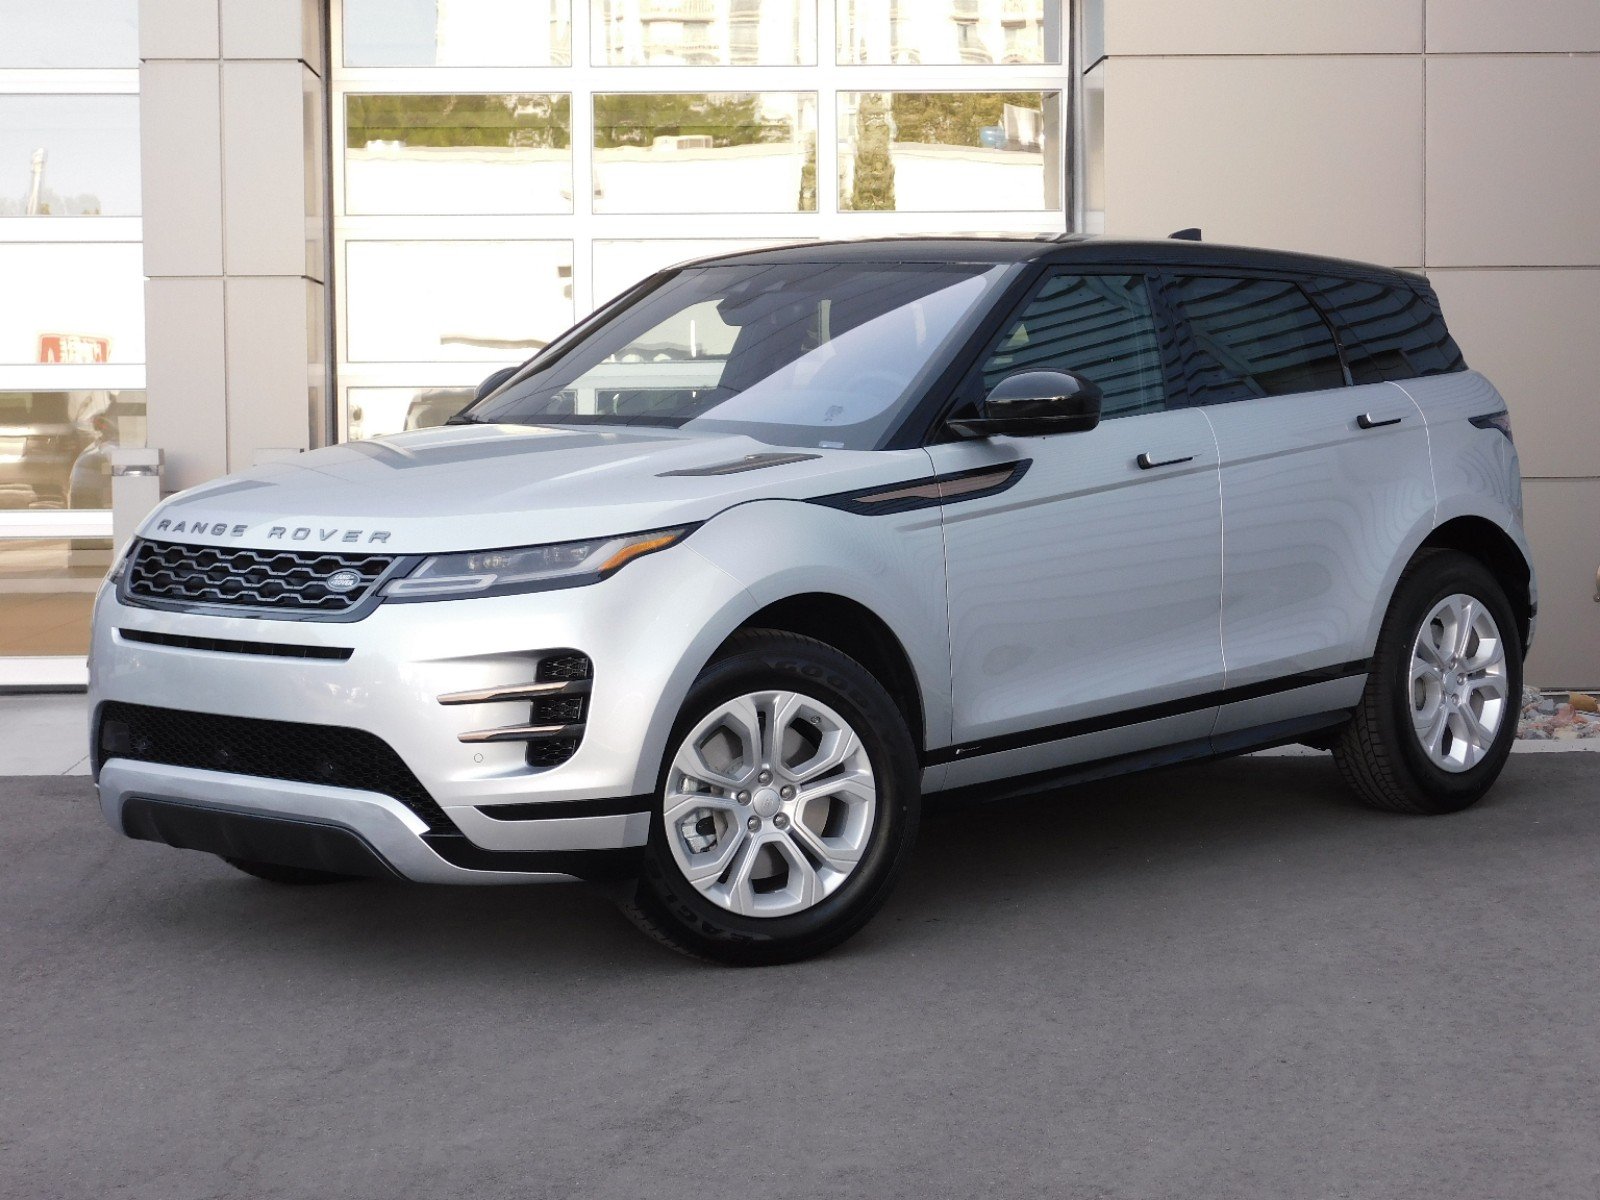 New Land Rover Range Rover Evoque R Dynamic S With Navigation Awd